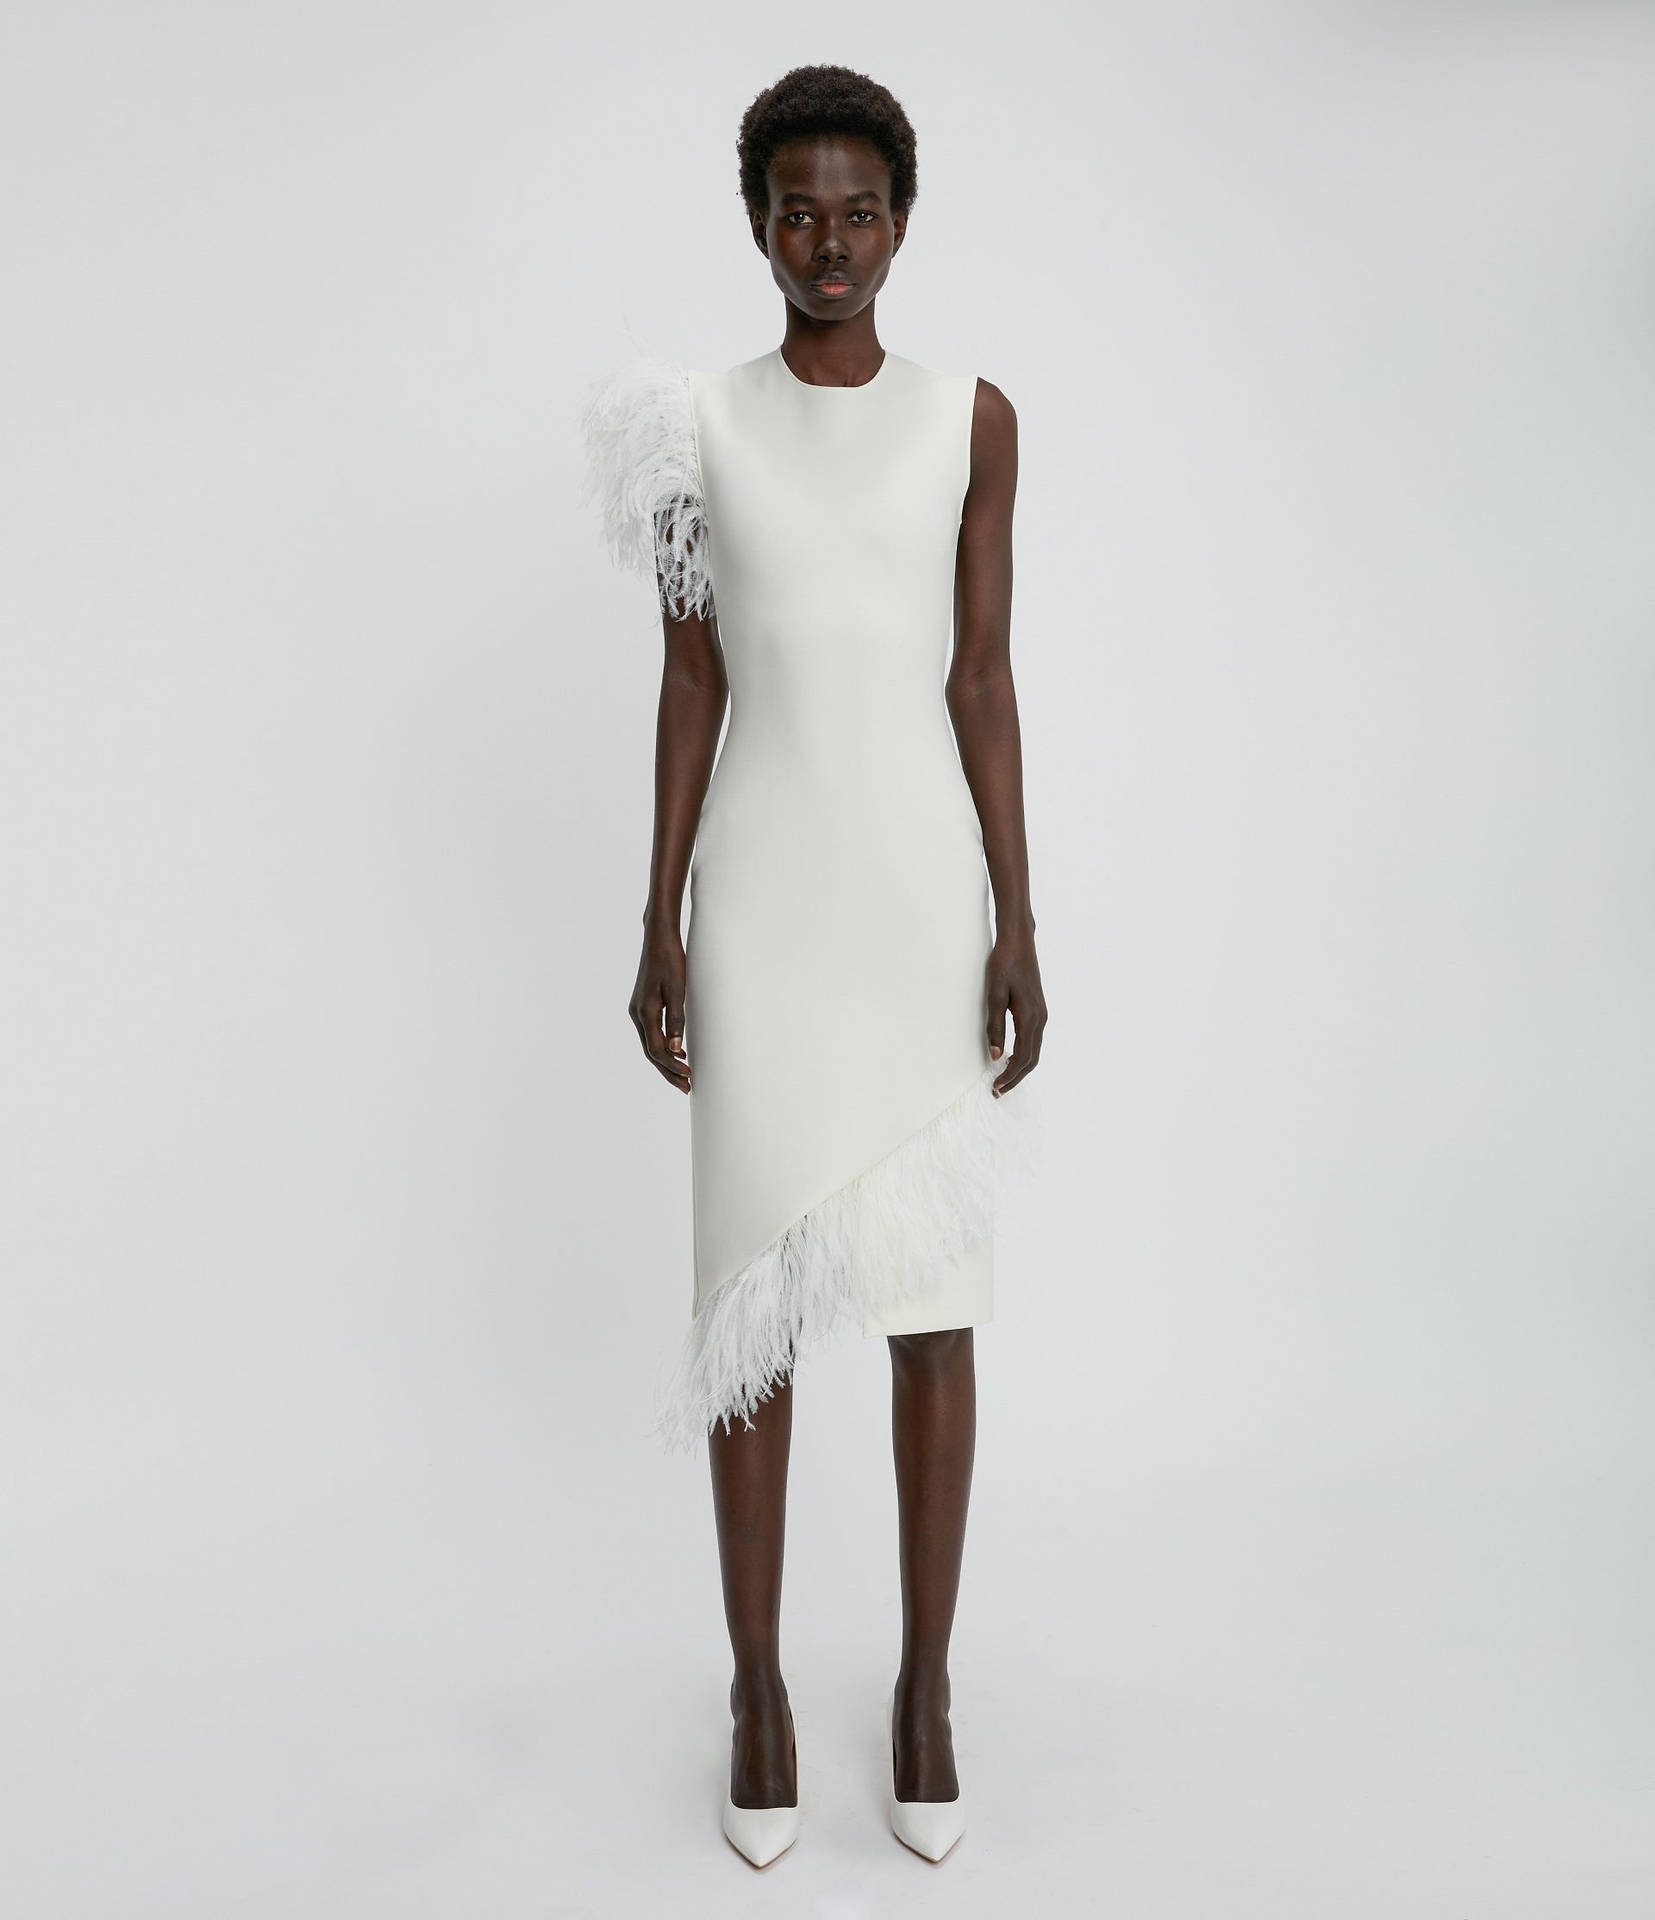 Christopher Kane White Dress With Feathers Wallpaper